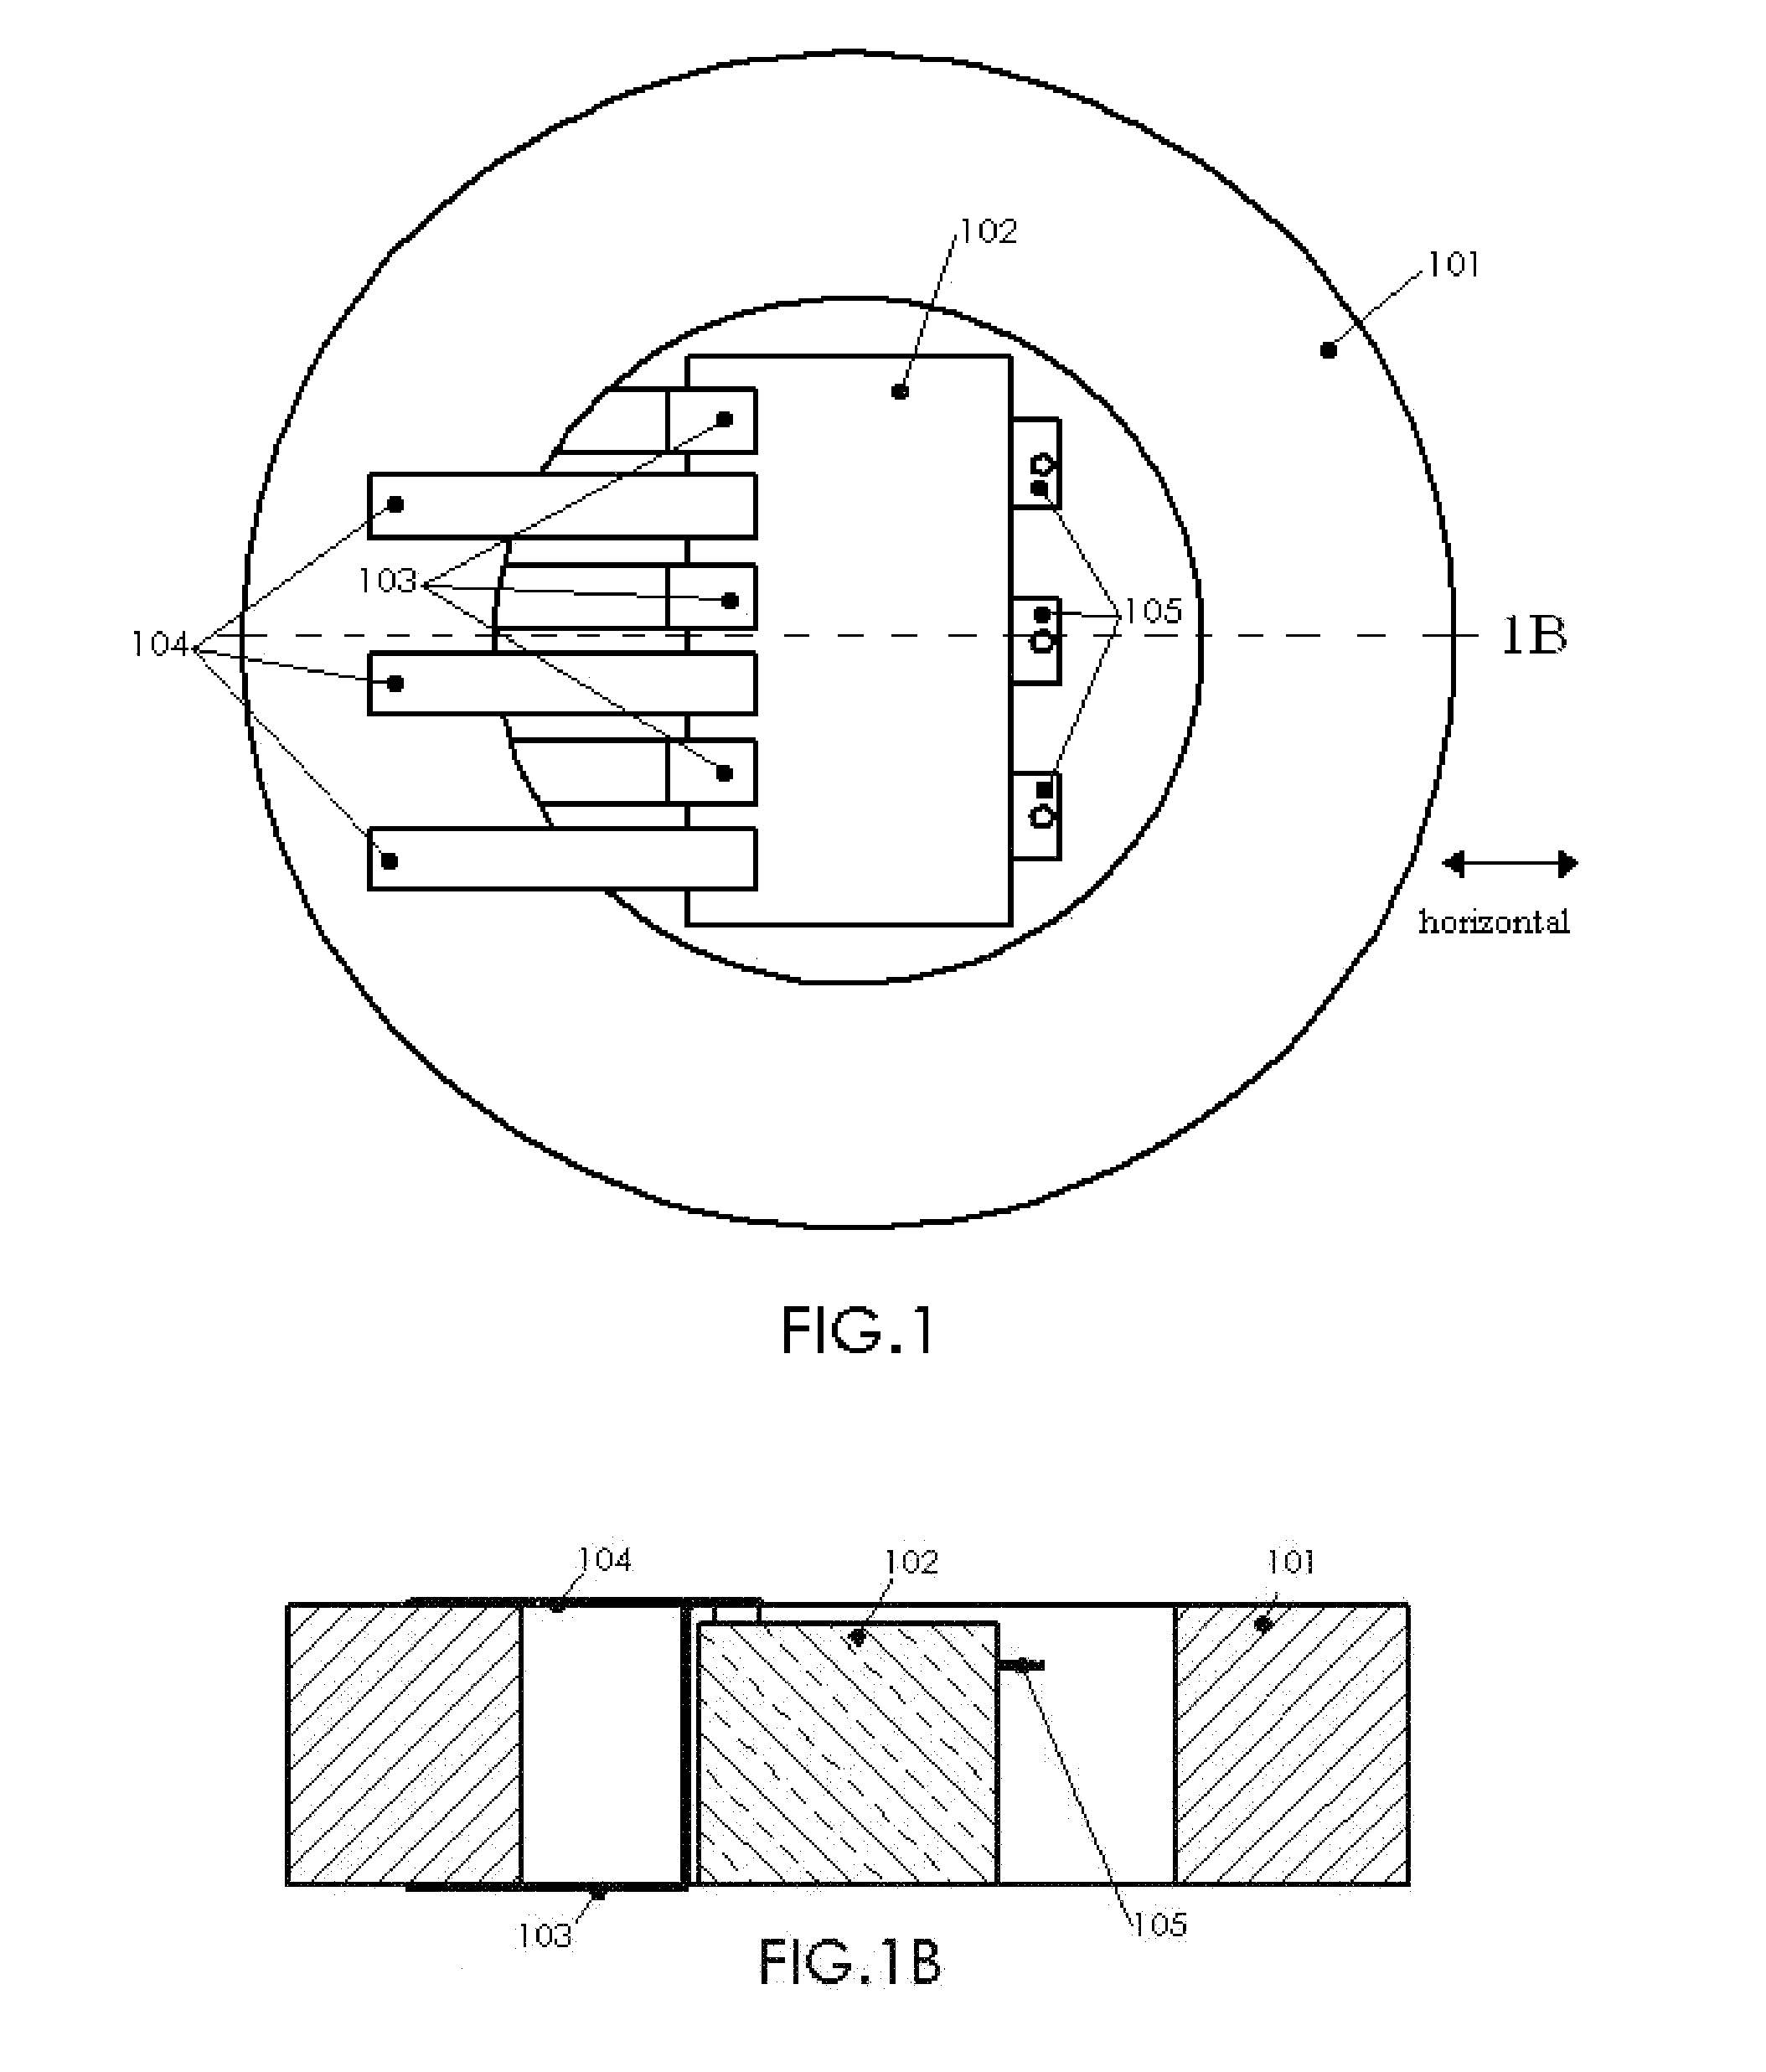 Annular Capacitor with power conversion components arranged and attached in manners uniquely allowed by the ring shaped form factor